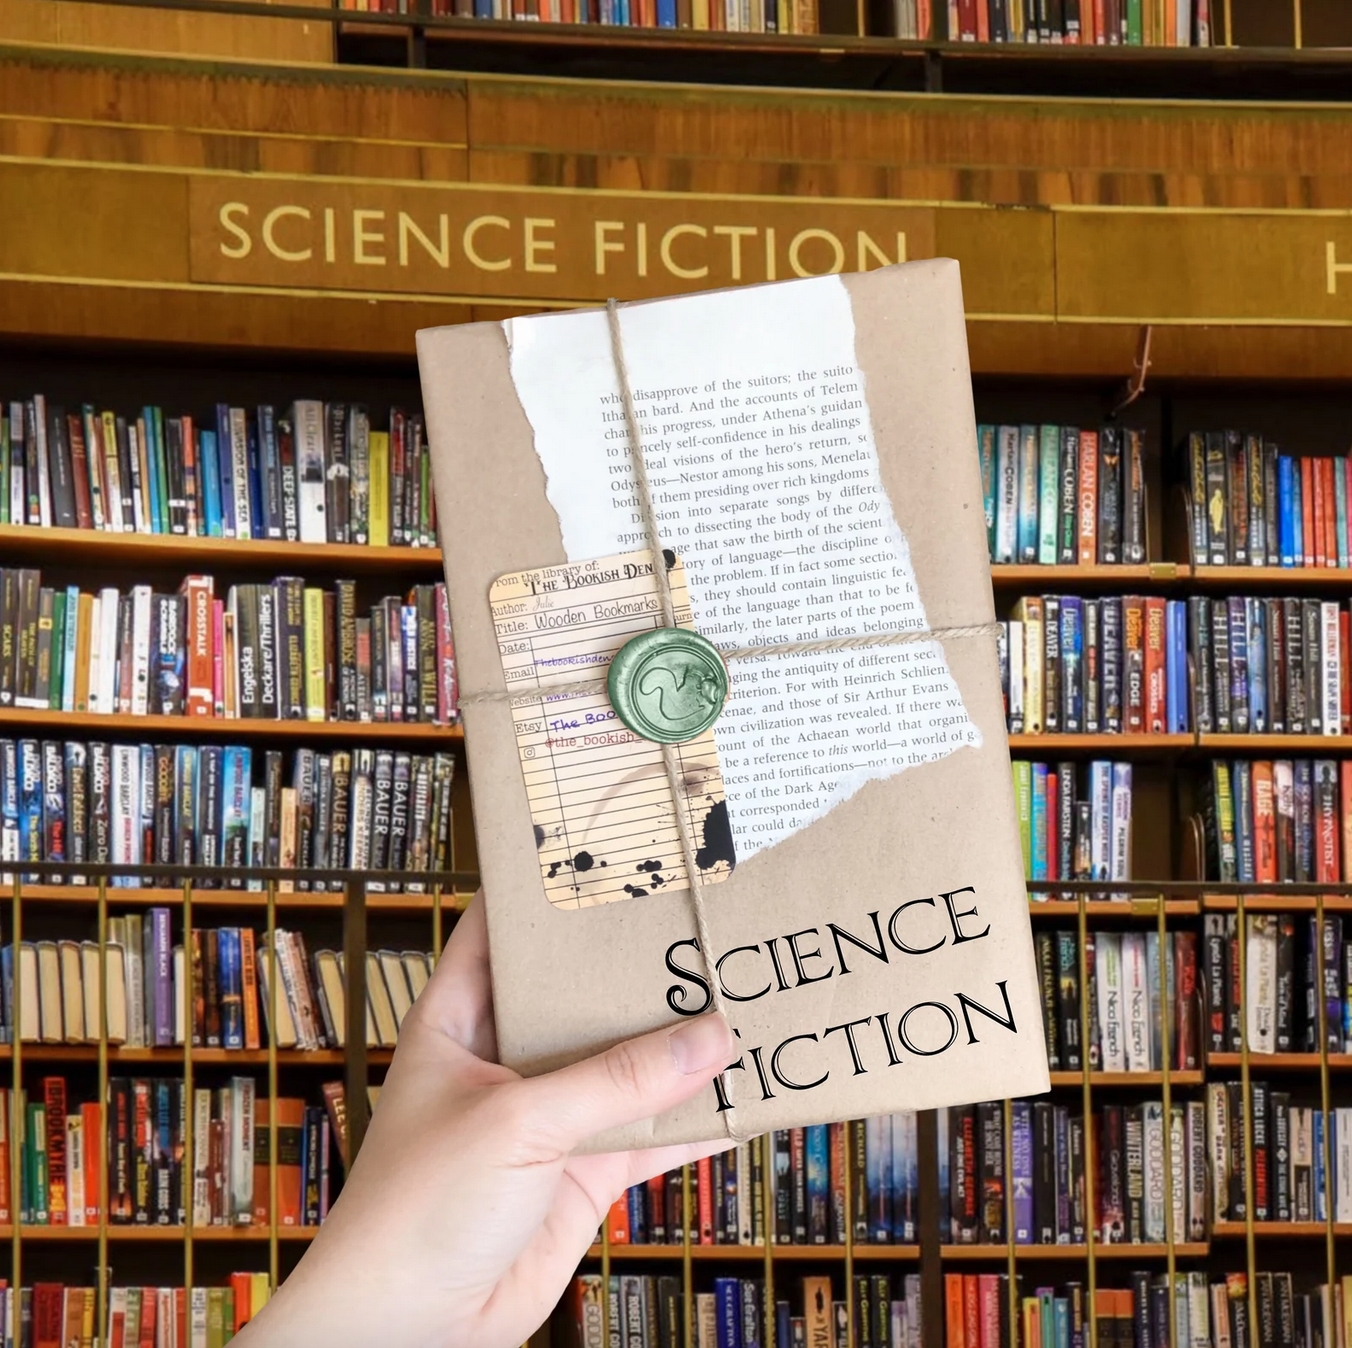 A hand holding a book wrapped in brown paper that says "science fiction"